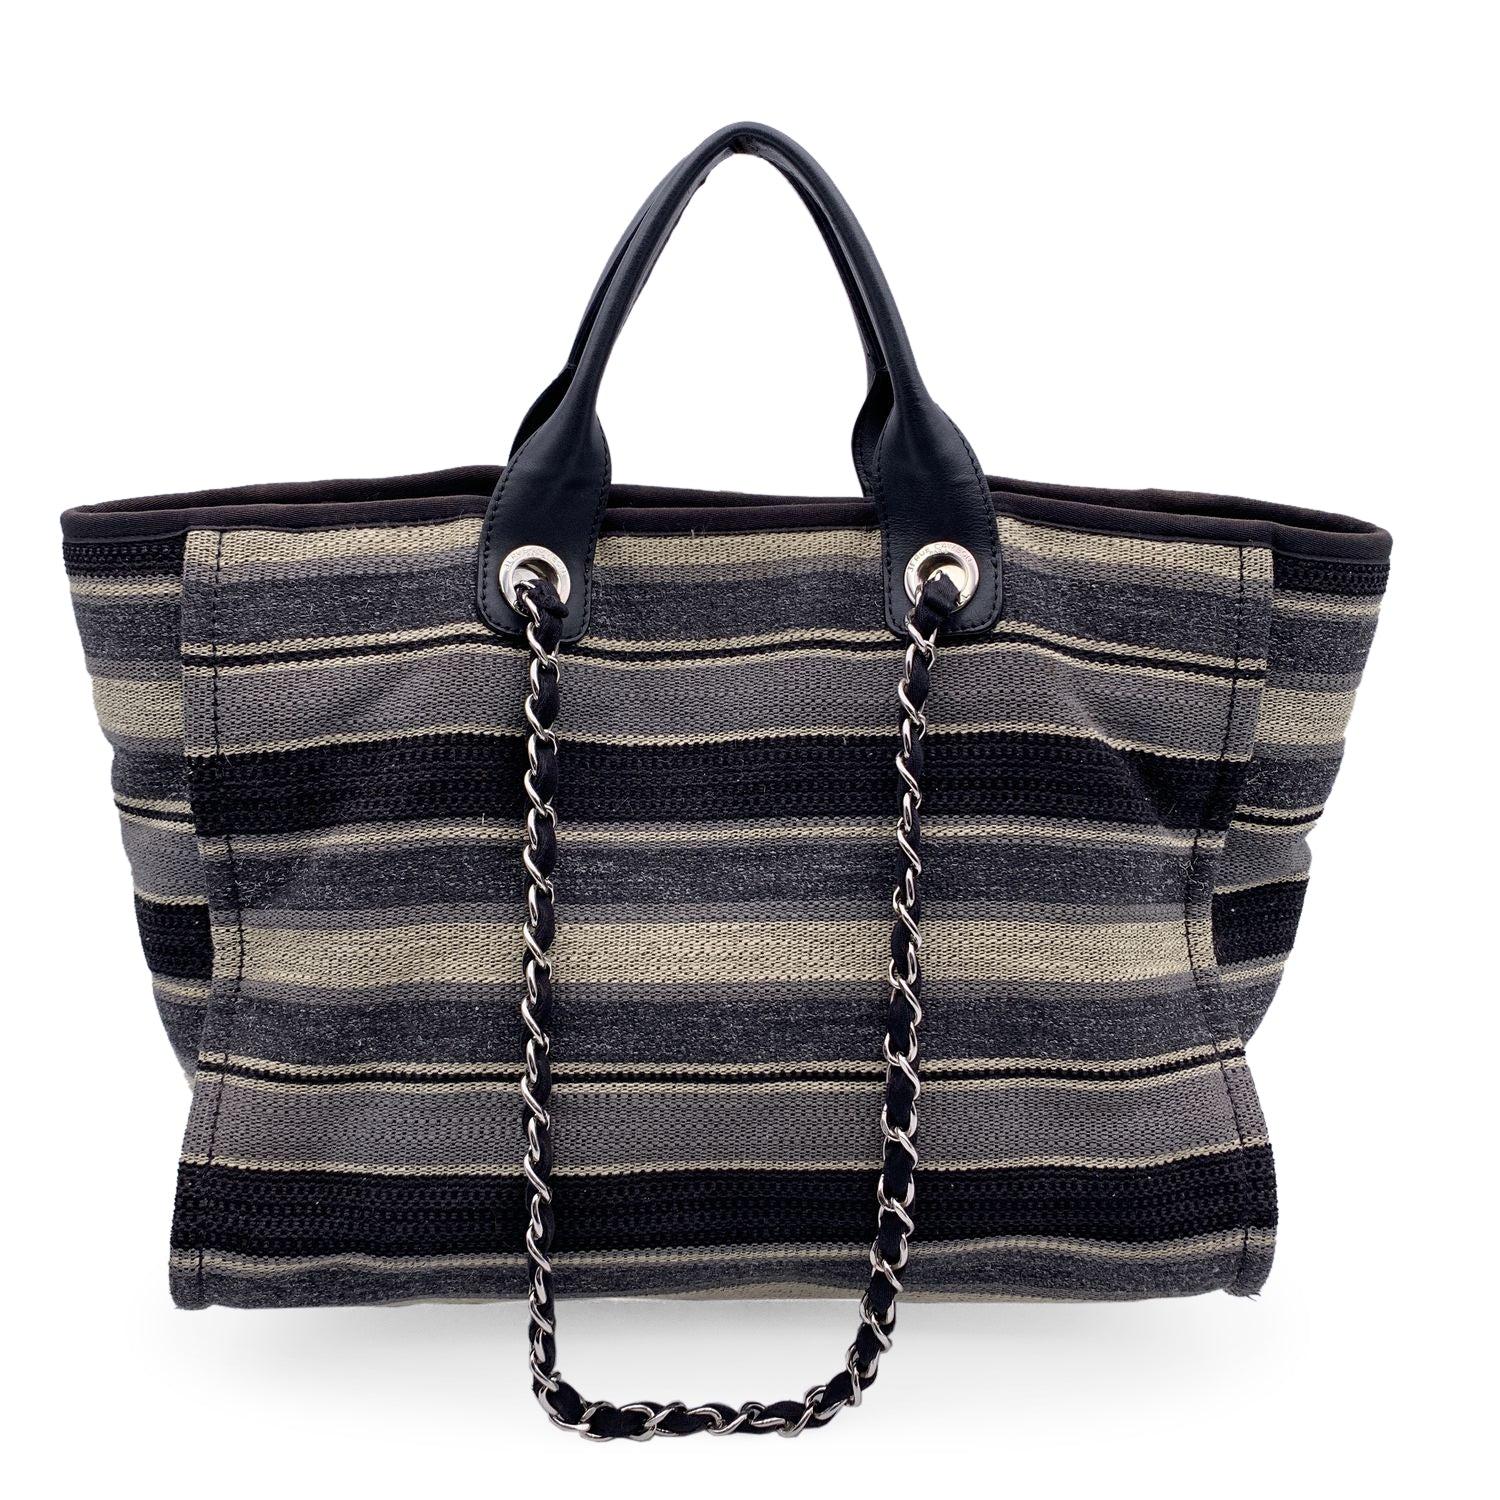 Chanel Black Grey Striped Canvas Medium Deauville Tote Bag In Good Condition For Sale In Rome, Rome